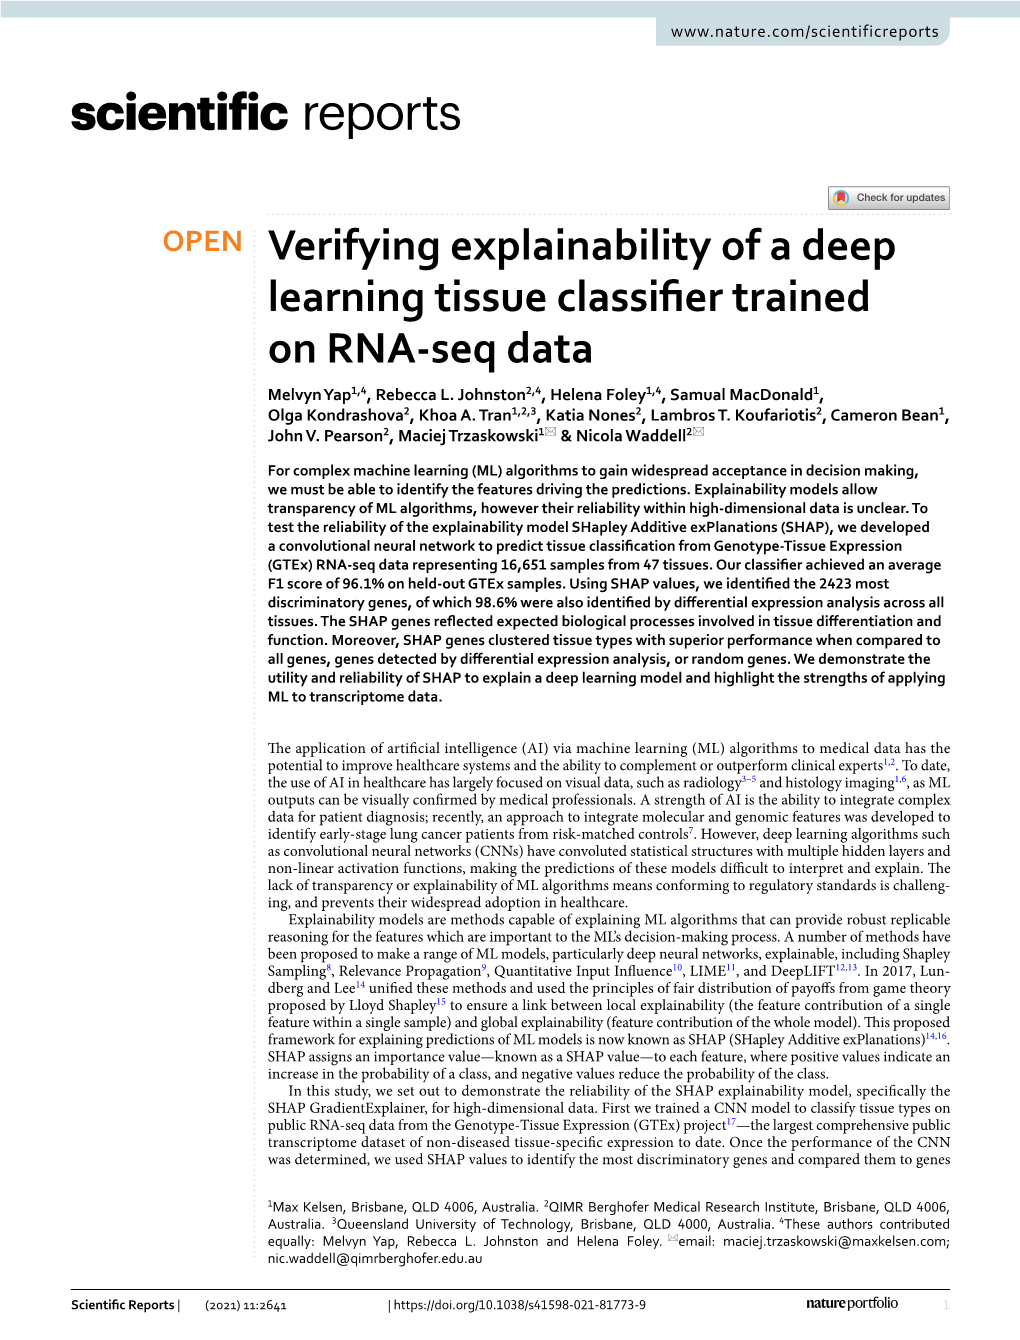 Verifying Explainability of a Deep Learning Tissue Classifier Trained on RNA-Seq Data